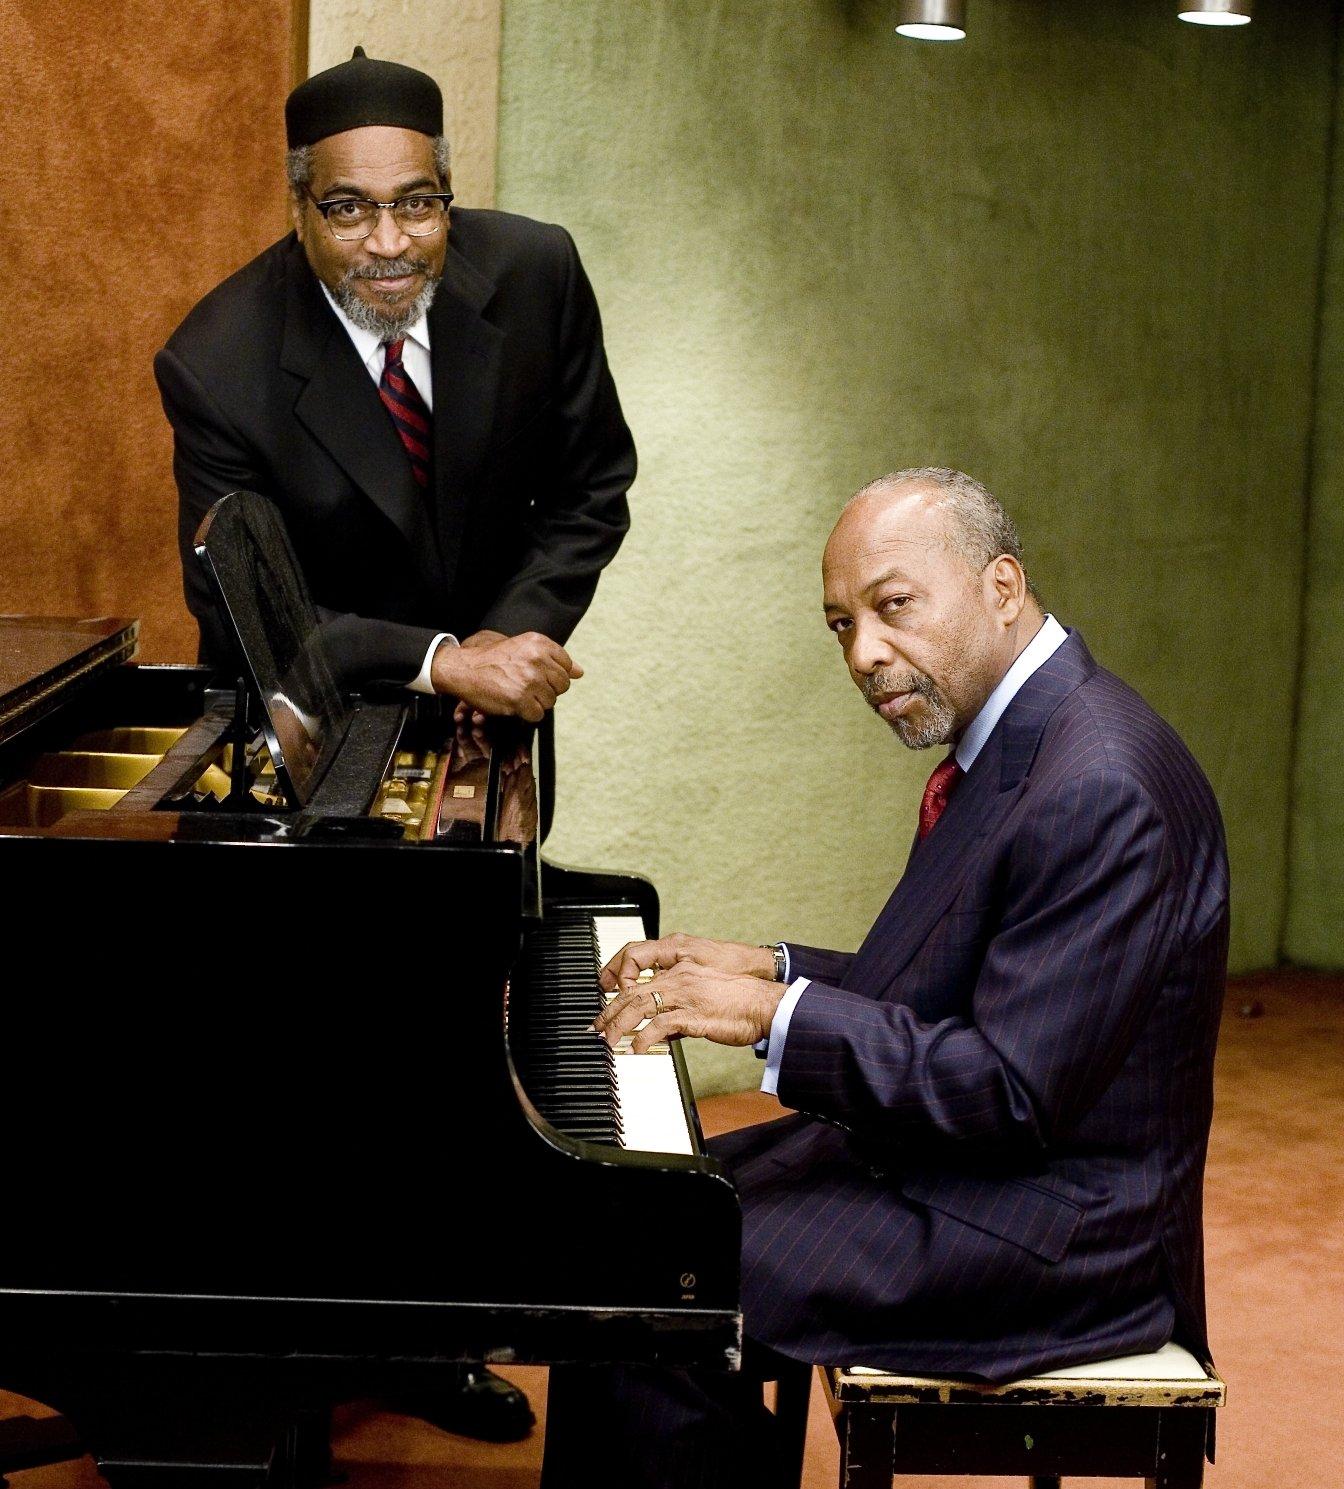 Kenny Gamble and Leon Huff at the piano